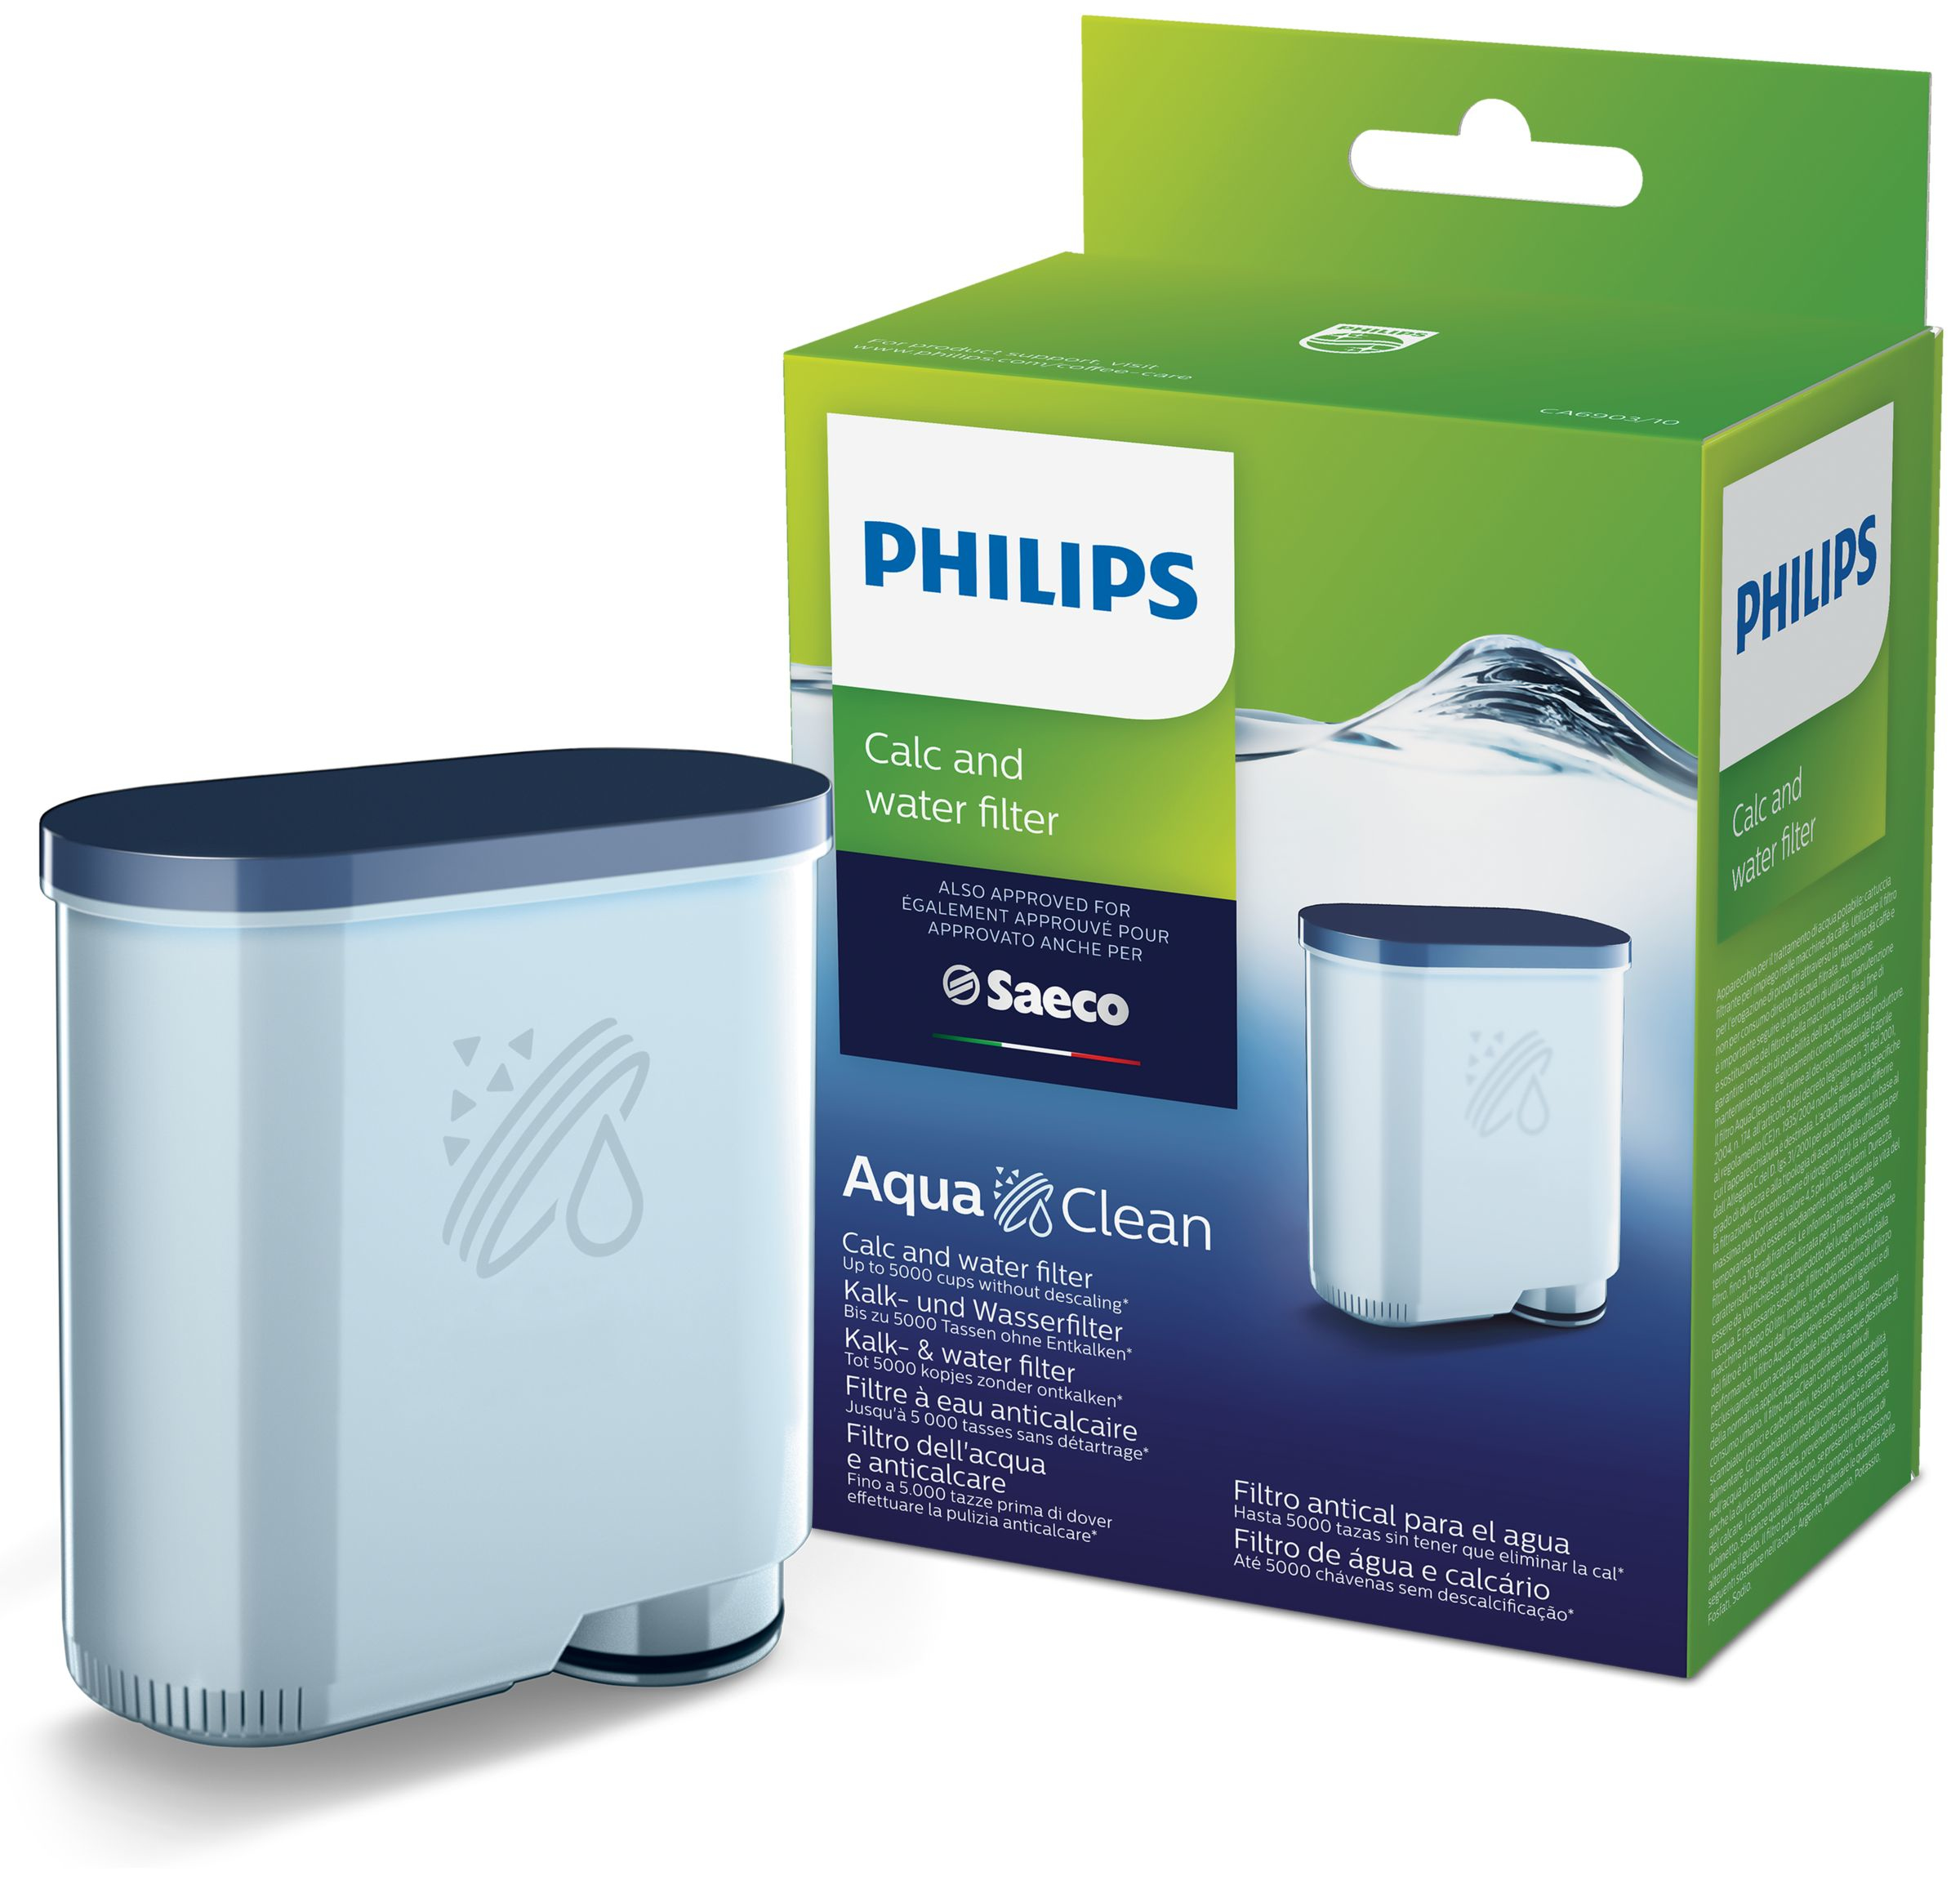 Philips Calc and Water filter